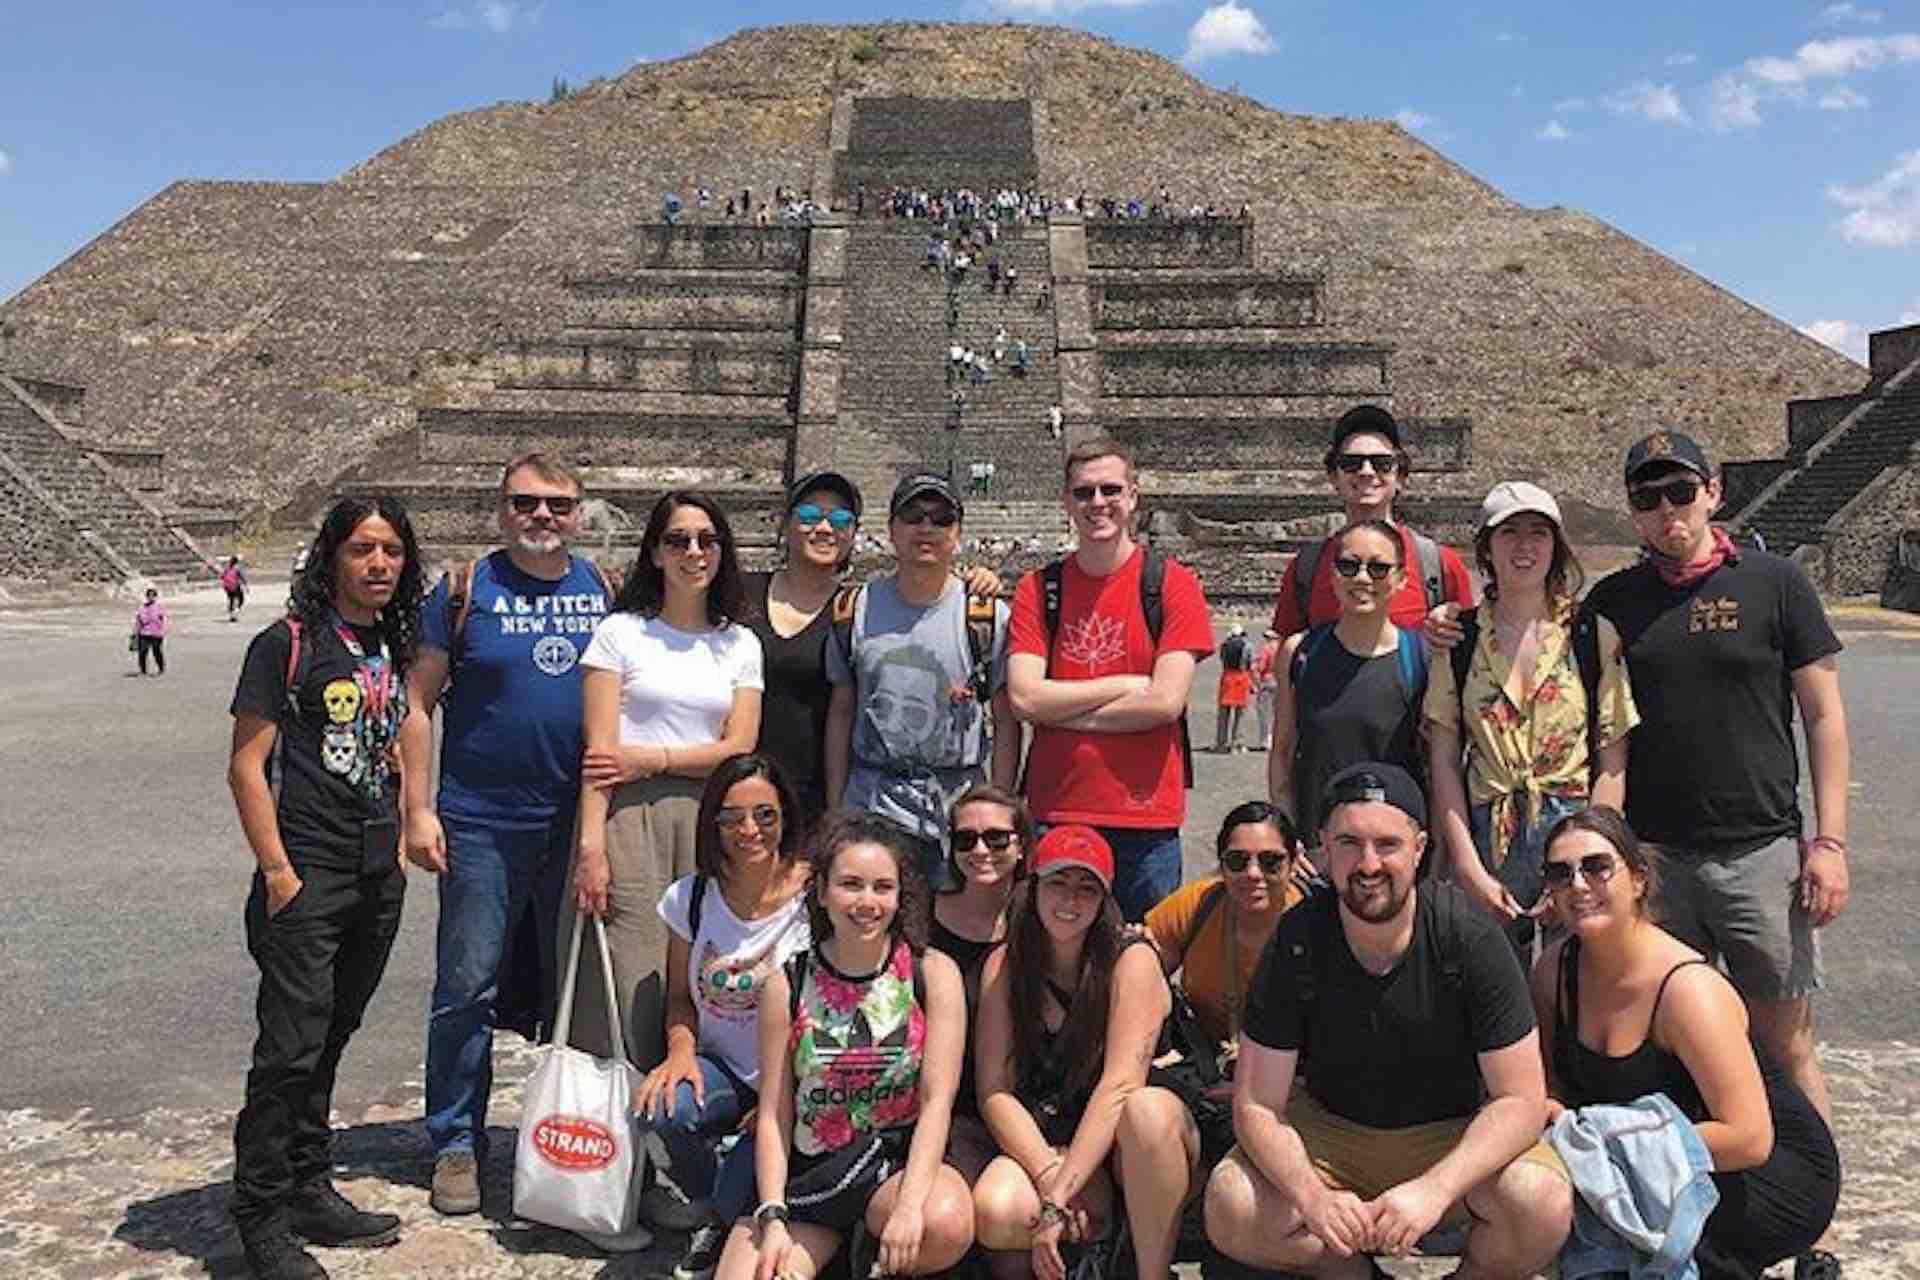 Teotihuacán visitor group photo in front of Sun pyramid during tour